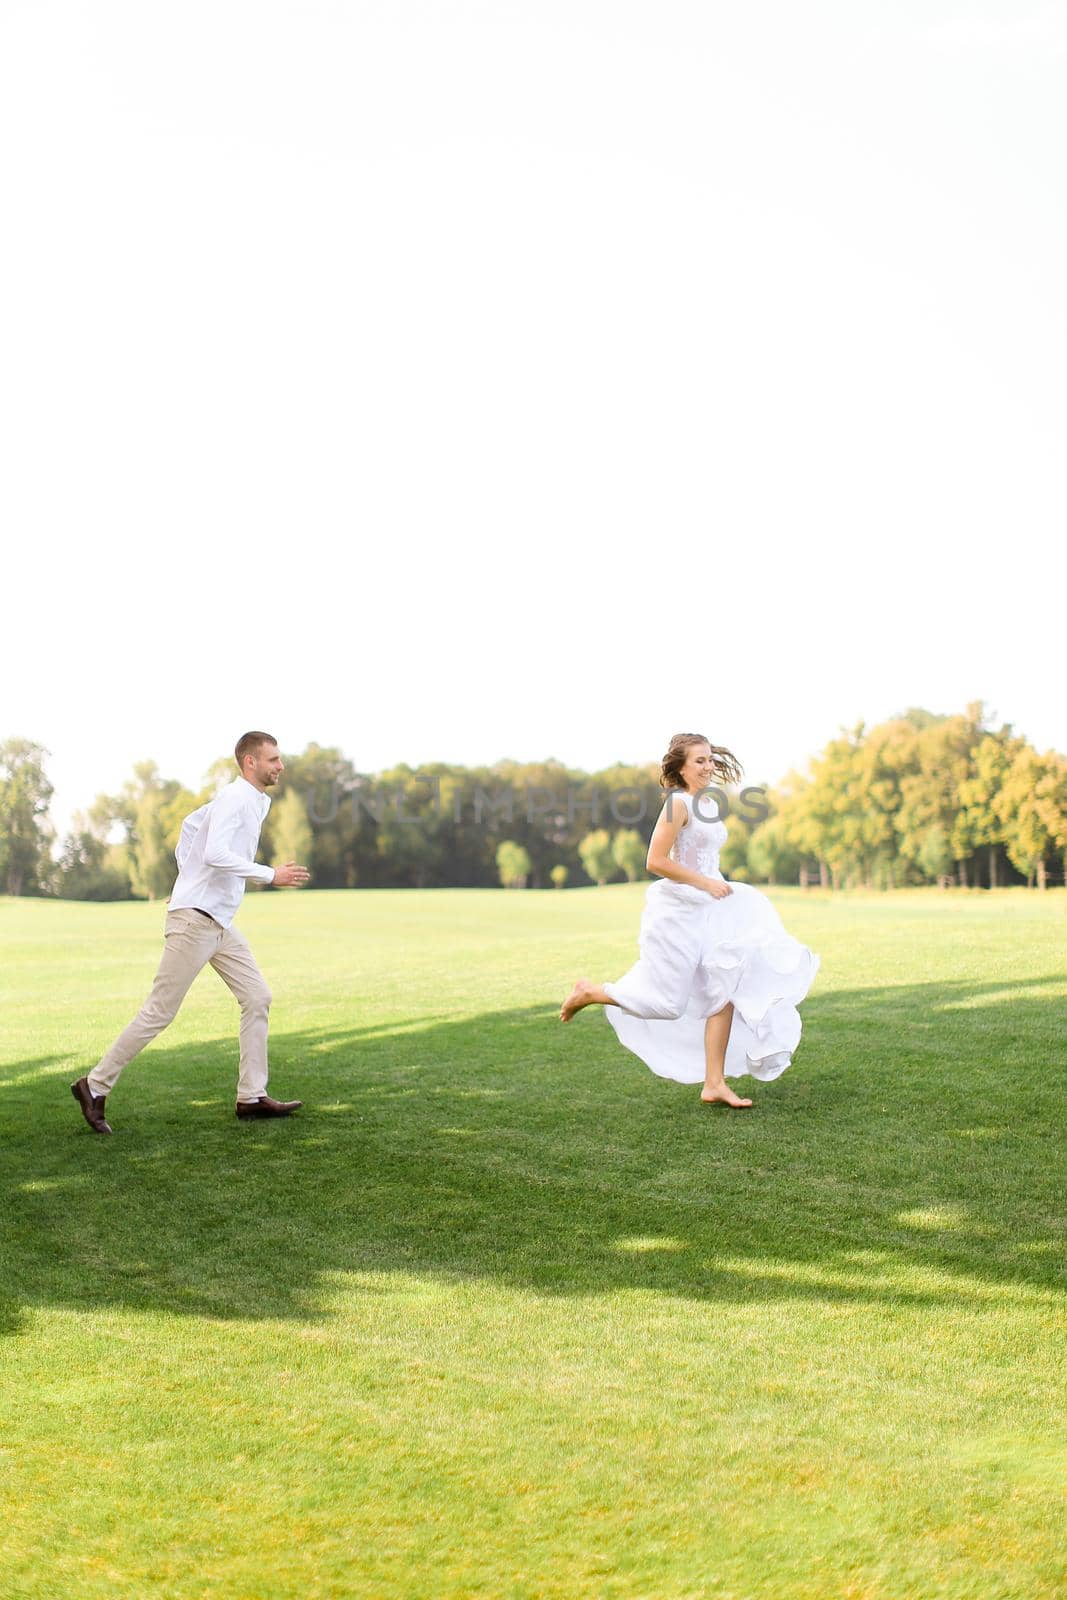 Groom and young bride running and playing on grass. by sisterspro